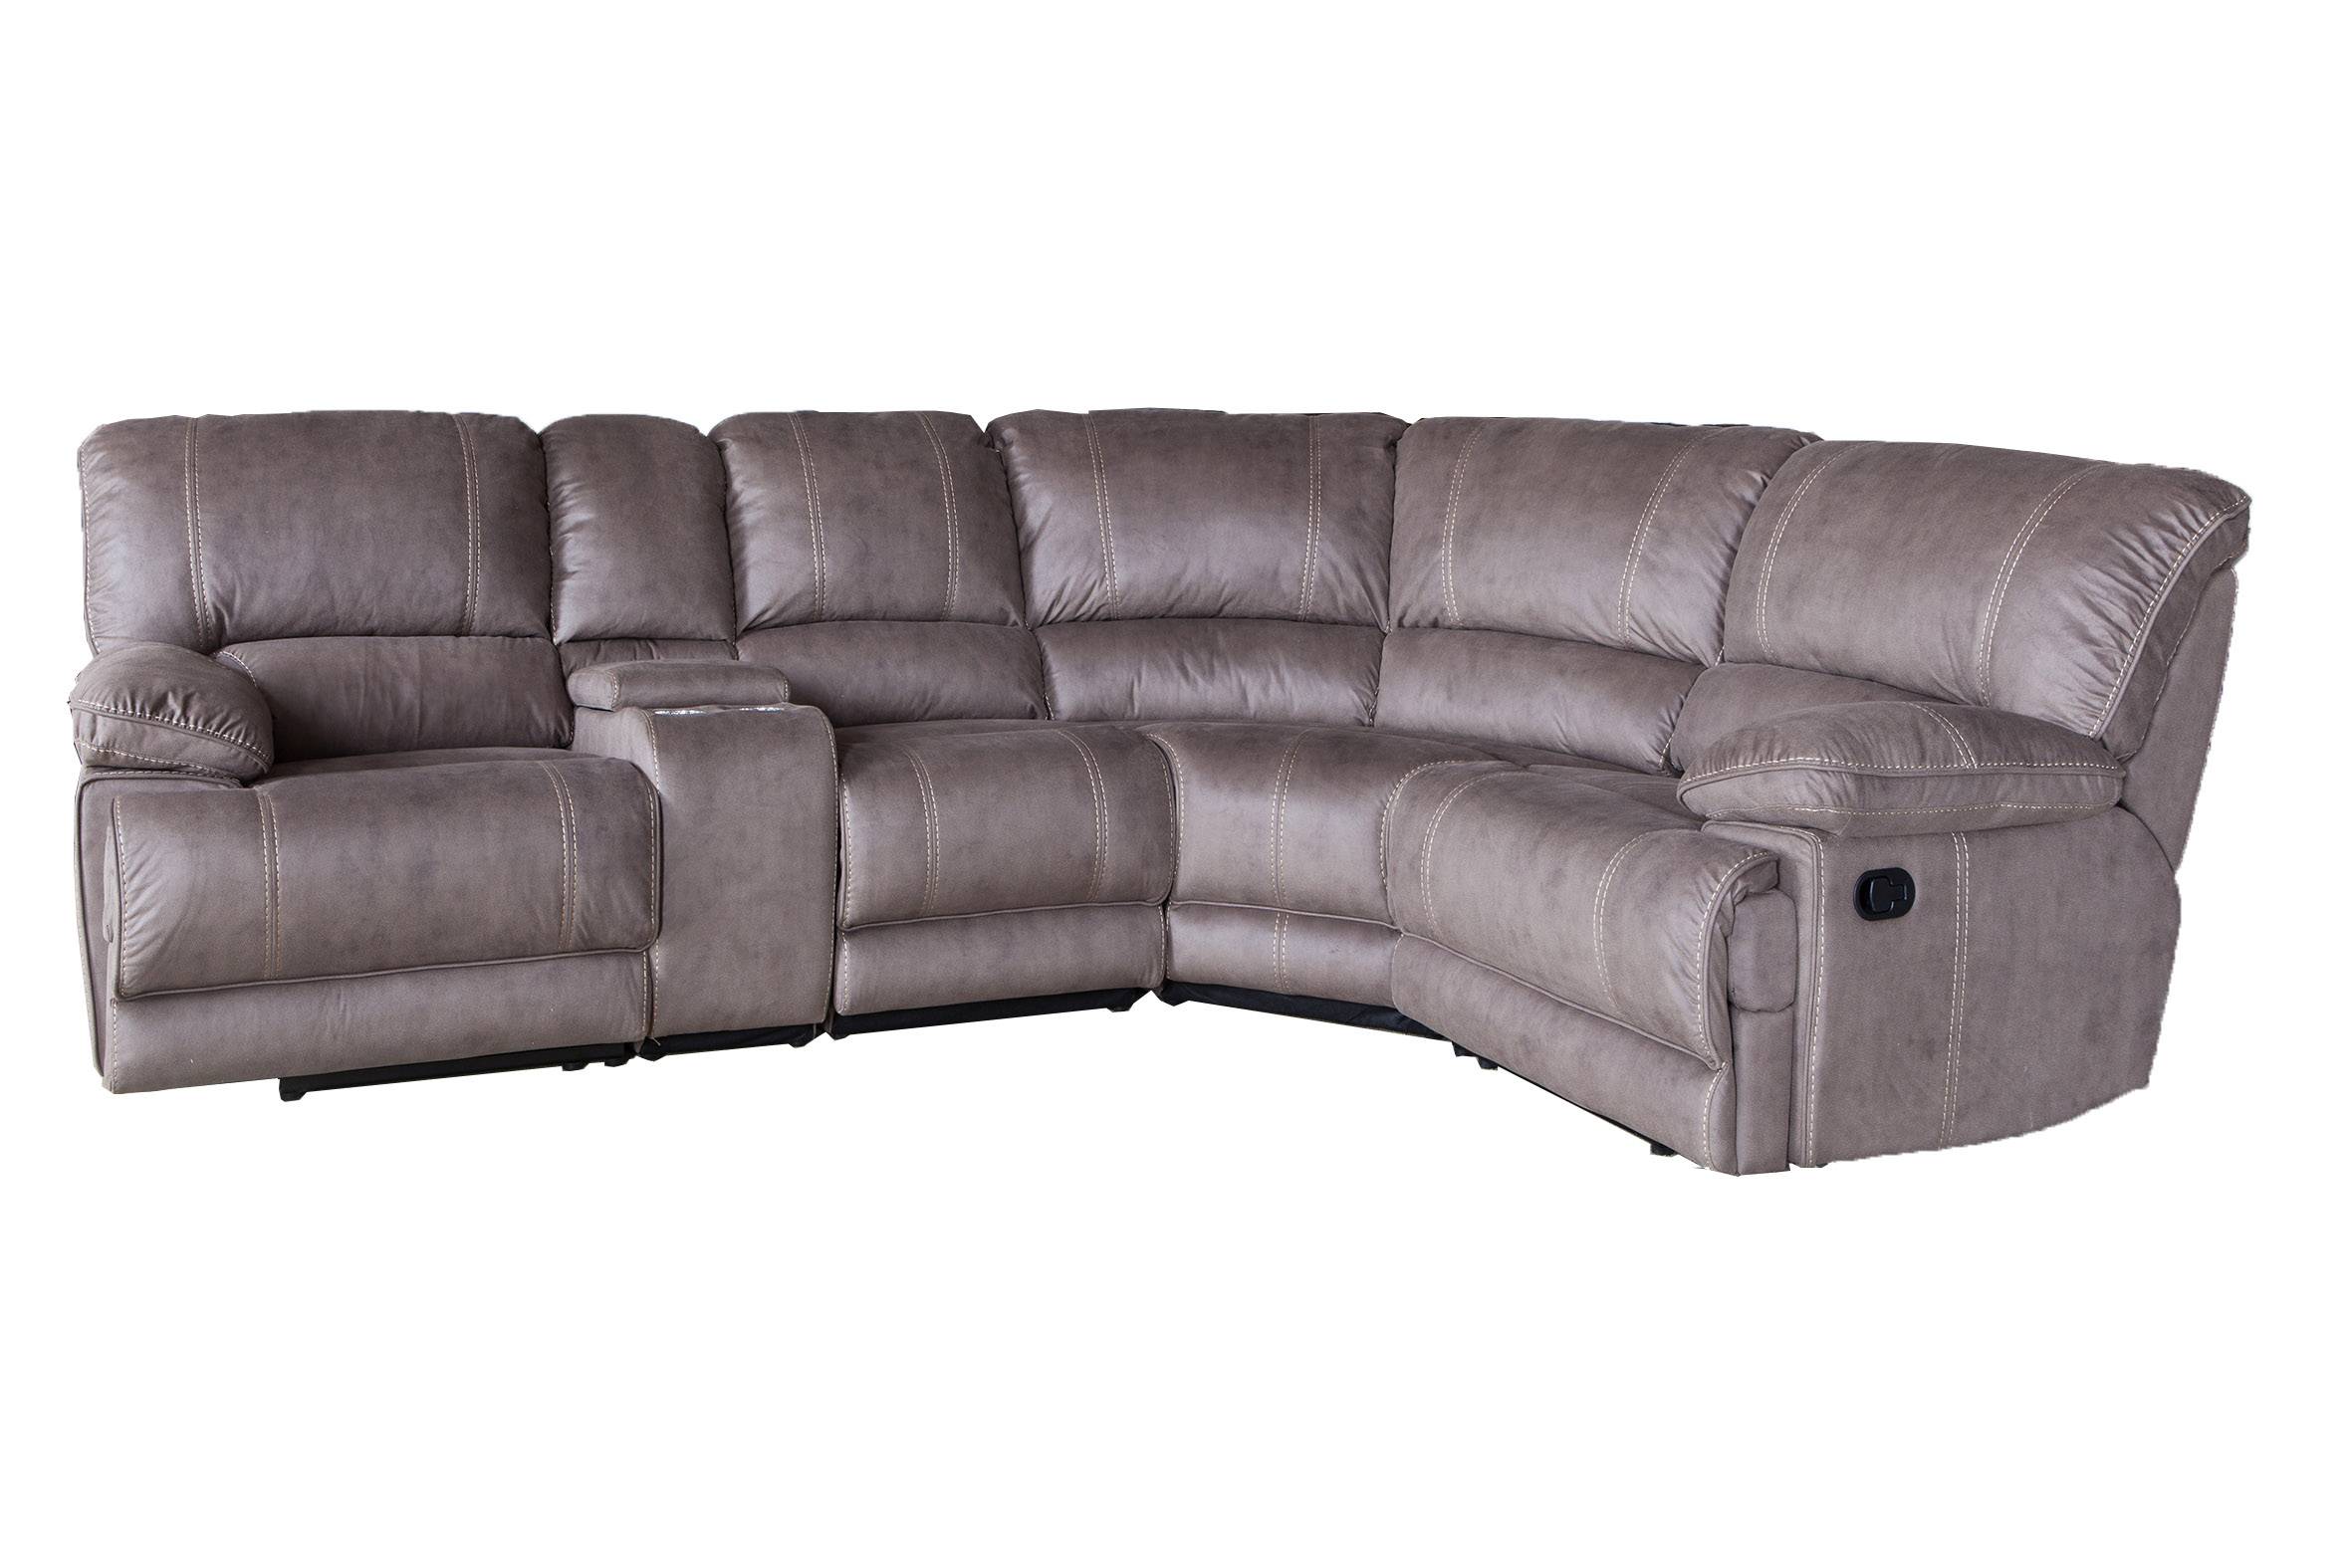 China Cheap PriceList for Sectional Fabric Recliner chiar - New modern